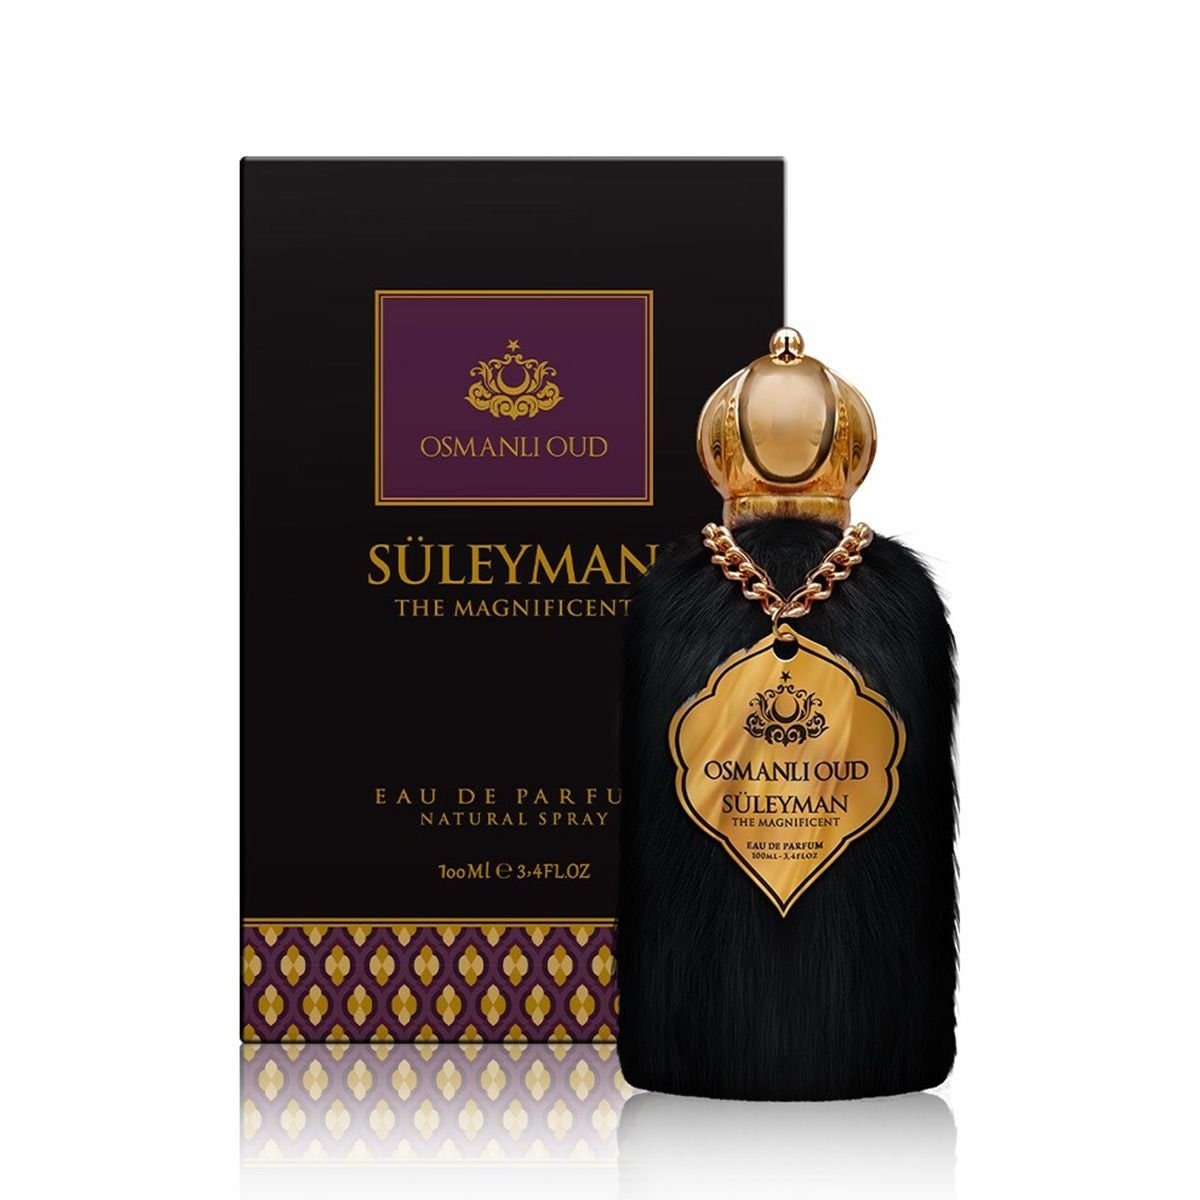 Hurrem and Suleiman Original Perfume SET OF 2, Hurrem "The Cheerful" and Sultan Suleiman "The Magnificent" Gift Set for Lovers, Original Set - Turkish TV Series